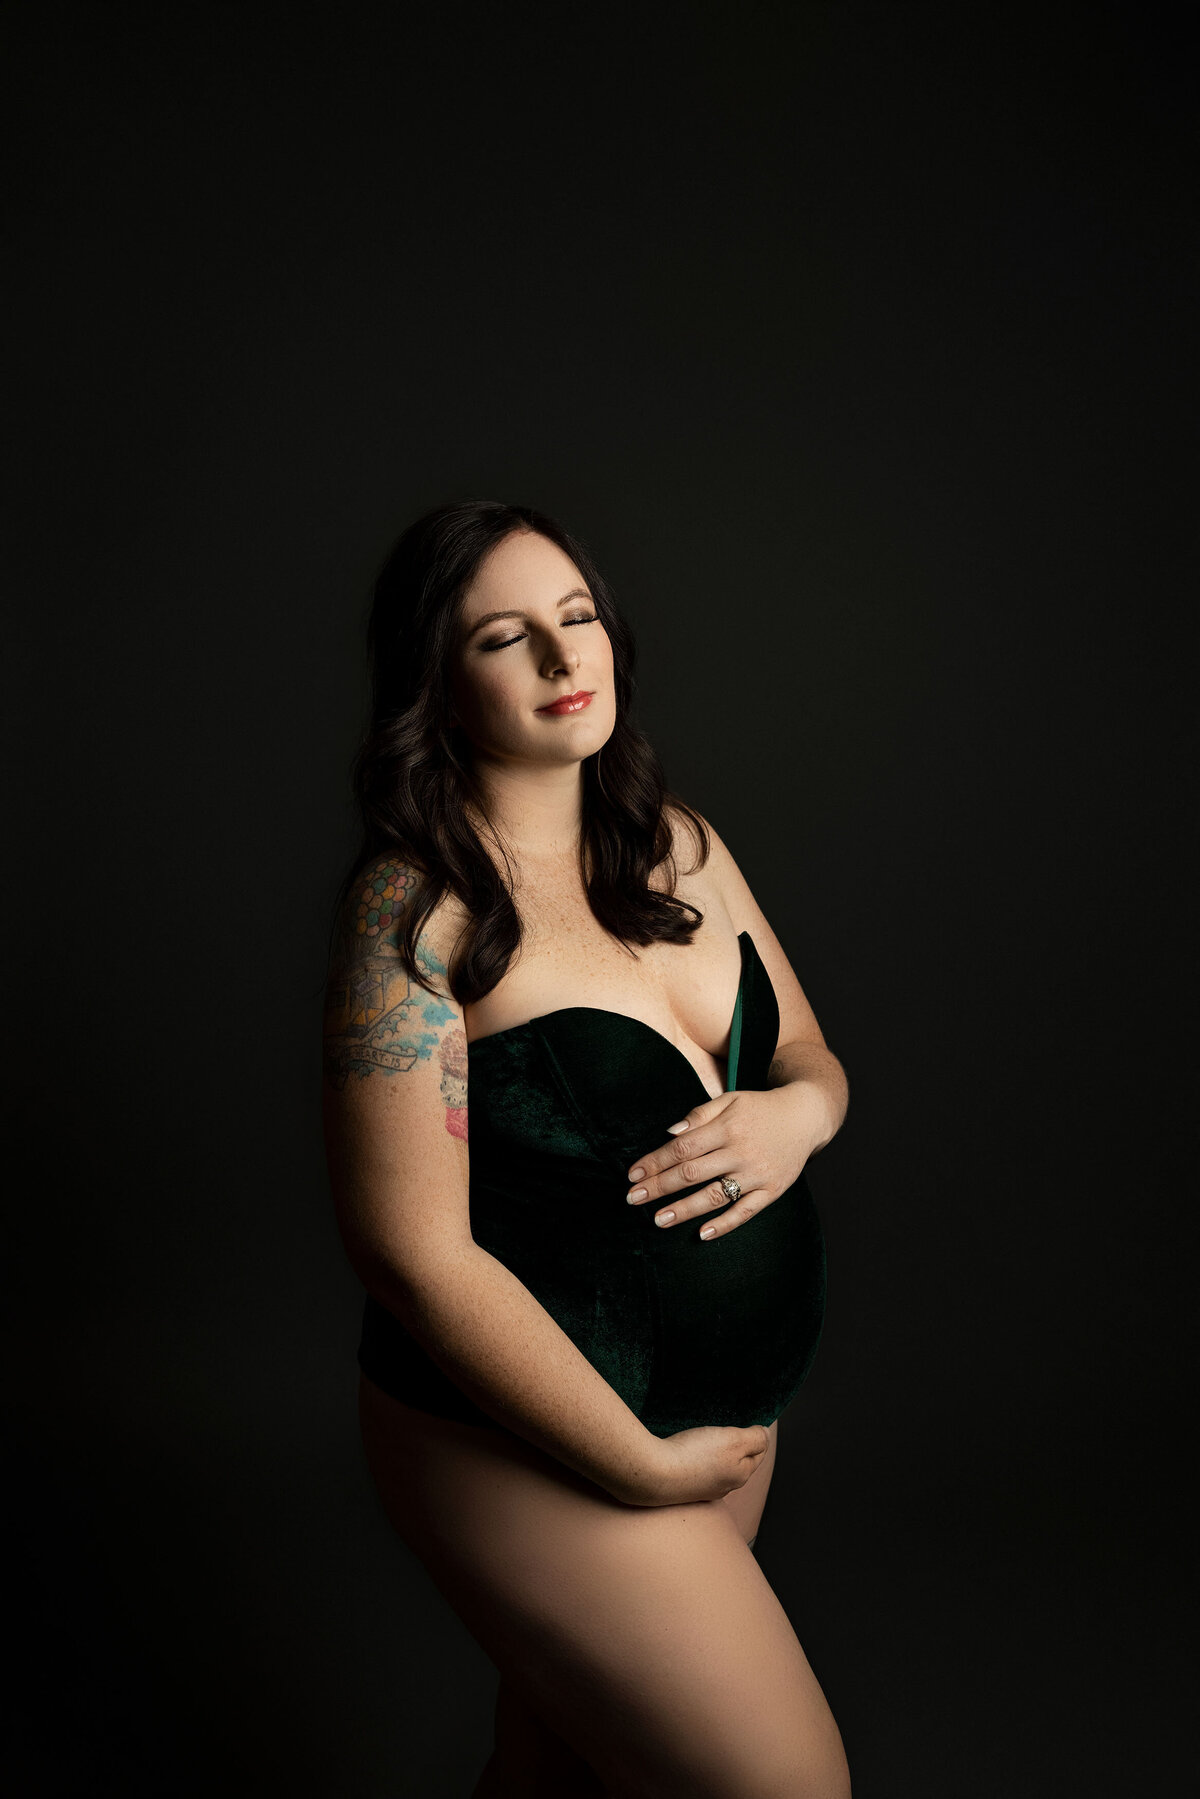 Expectant mom in deep green velvet bodysuit is holding her baby bump in london, ontario materntiy photoshoot. Mom's eyes are closed and her face is angled up to the light. She has bare legs. She is standing against a dark greyish black background. Her forearm has colourful tattoos.